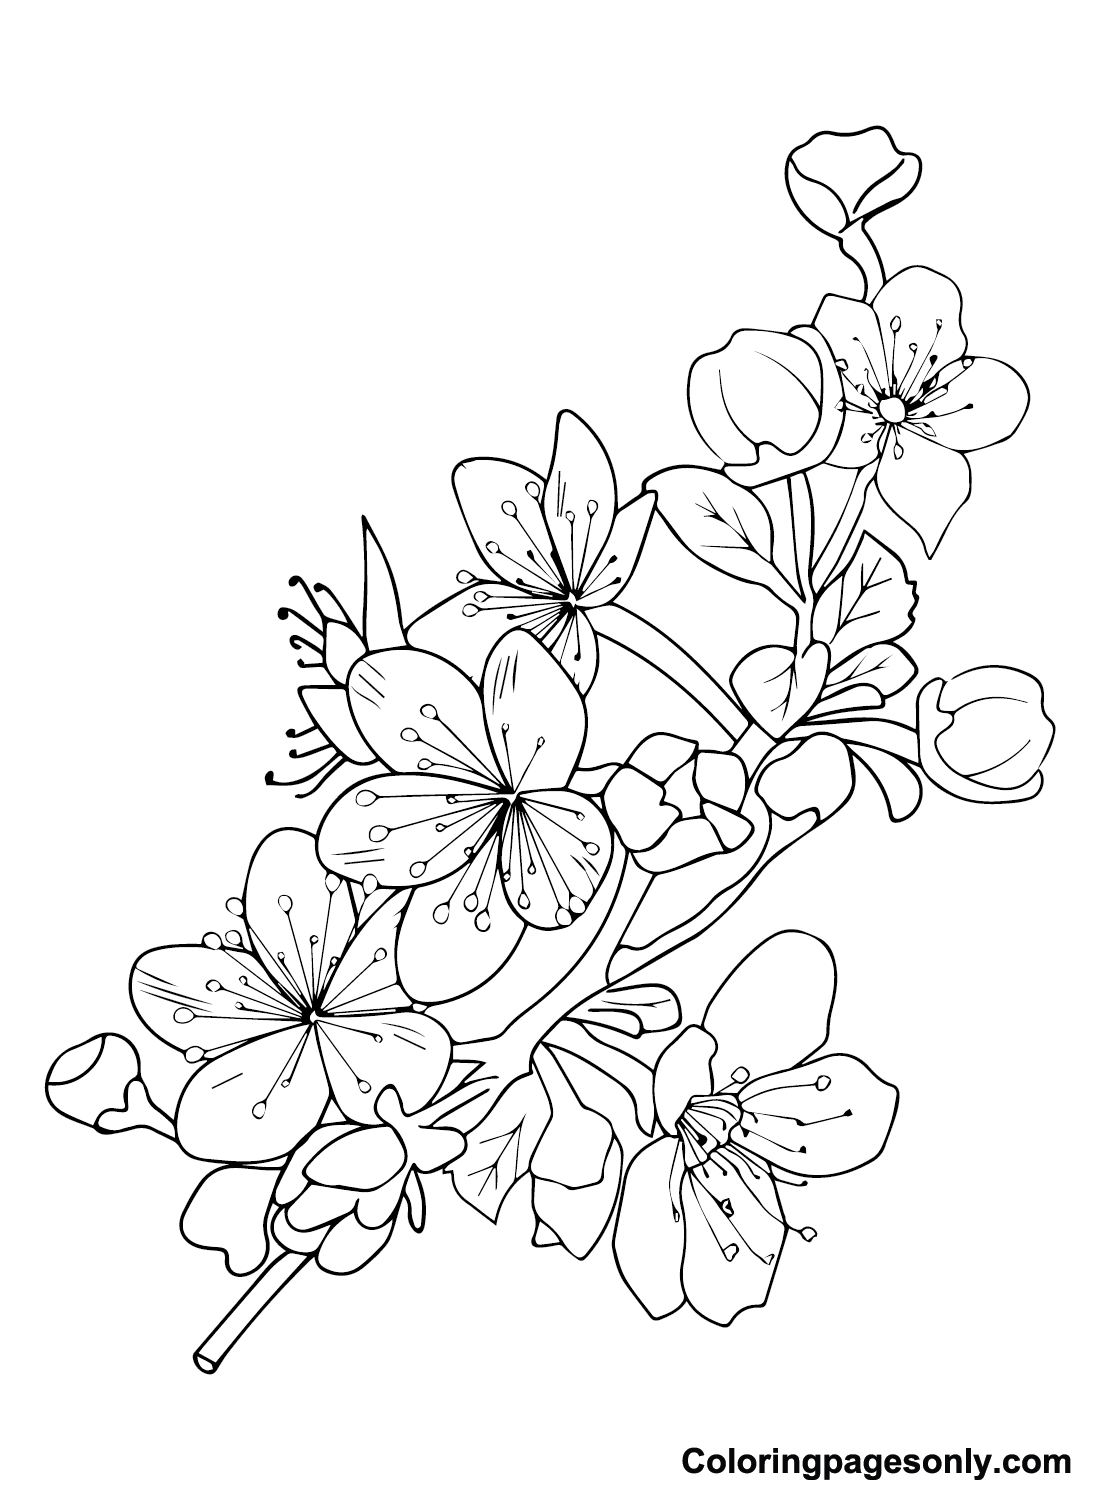 Cherry Blossom To Download Coloring Pages